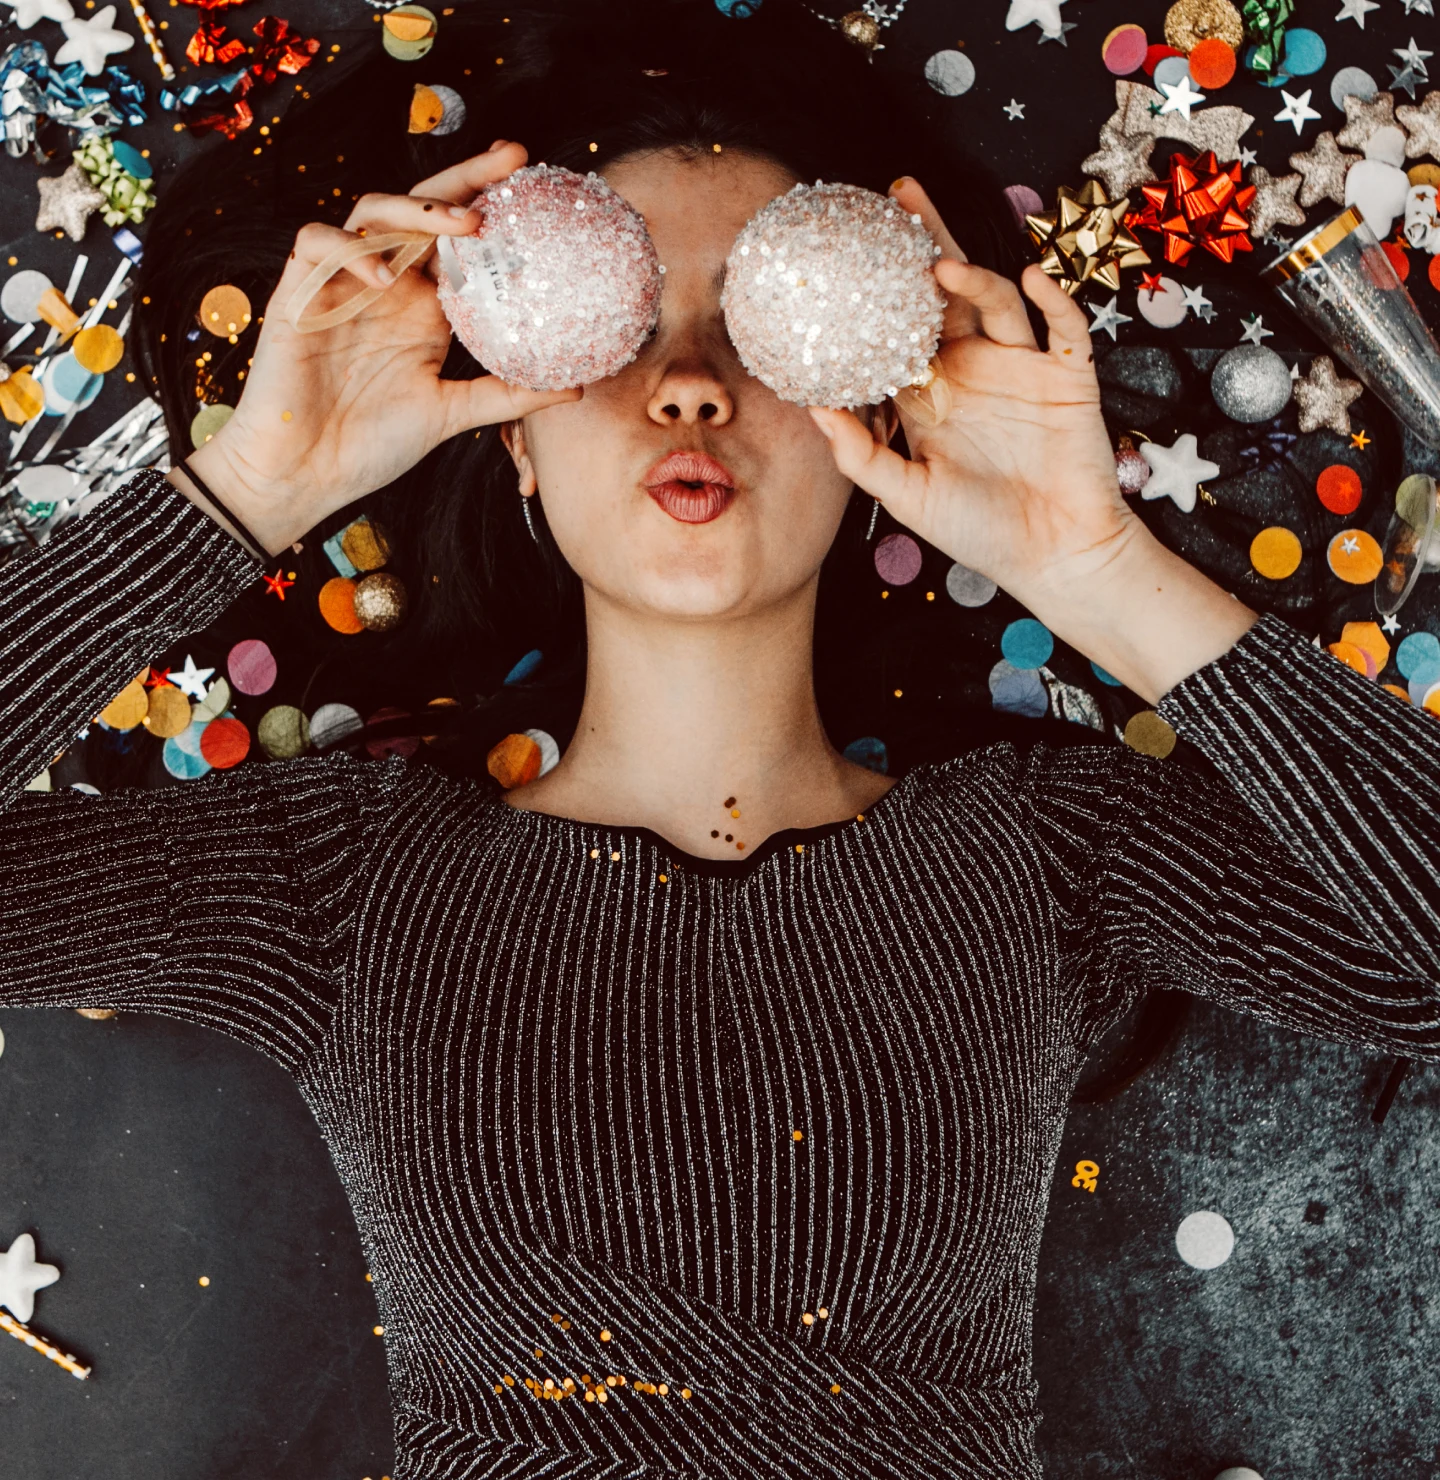 Image of a woman lying on the ground with her lips pursed and two small disco ball-type baubles covering her eyes. She's wearing a long-sleeved sparkly shirt, with confetti covering the ground around her. 